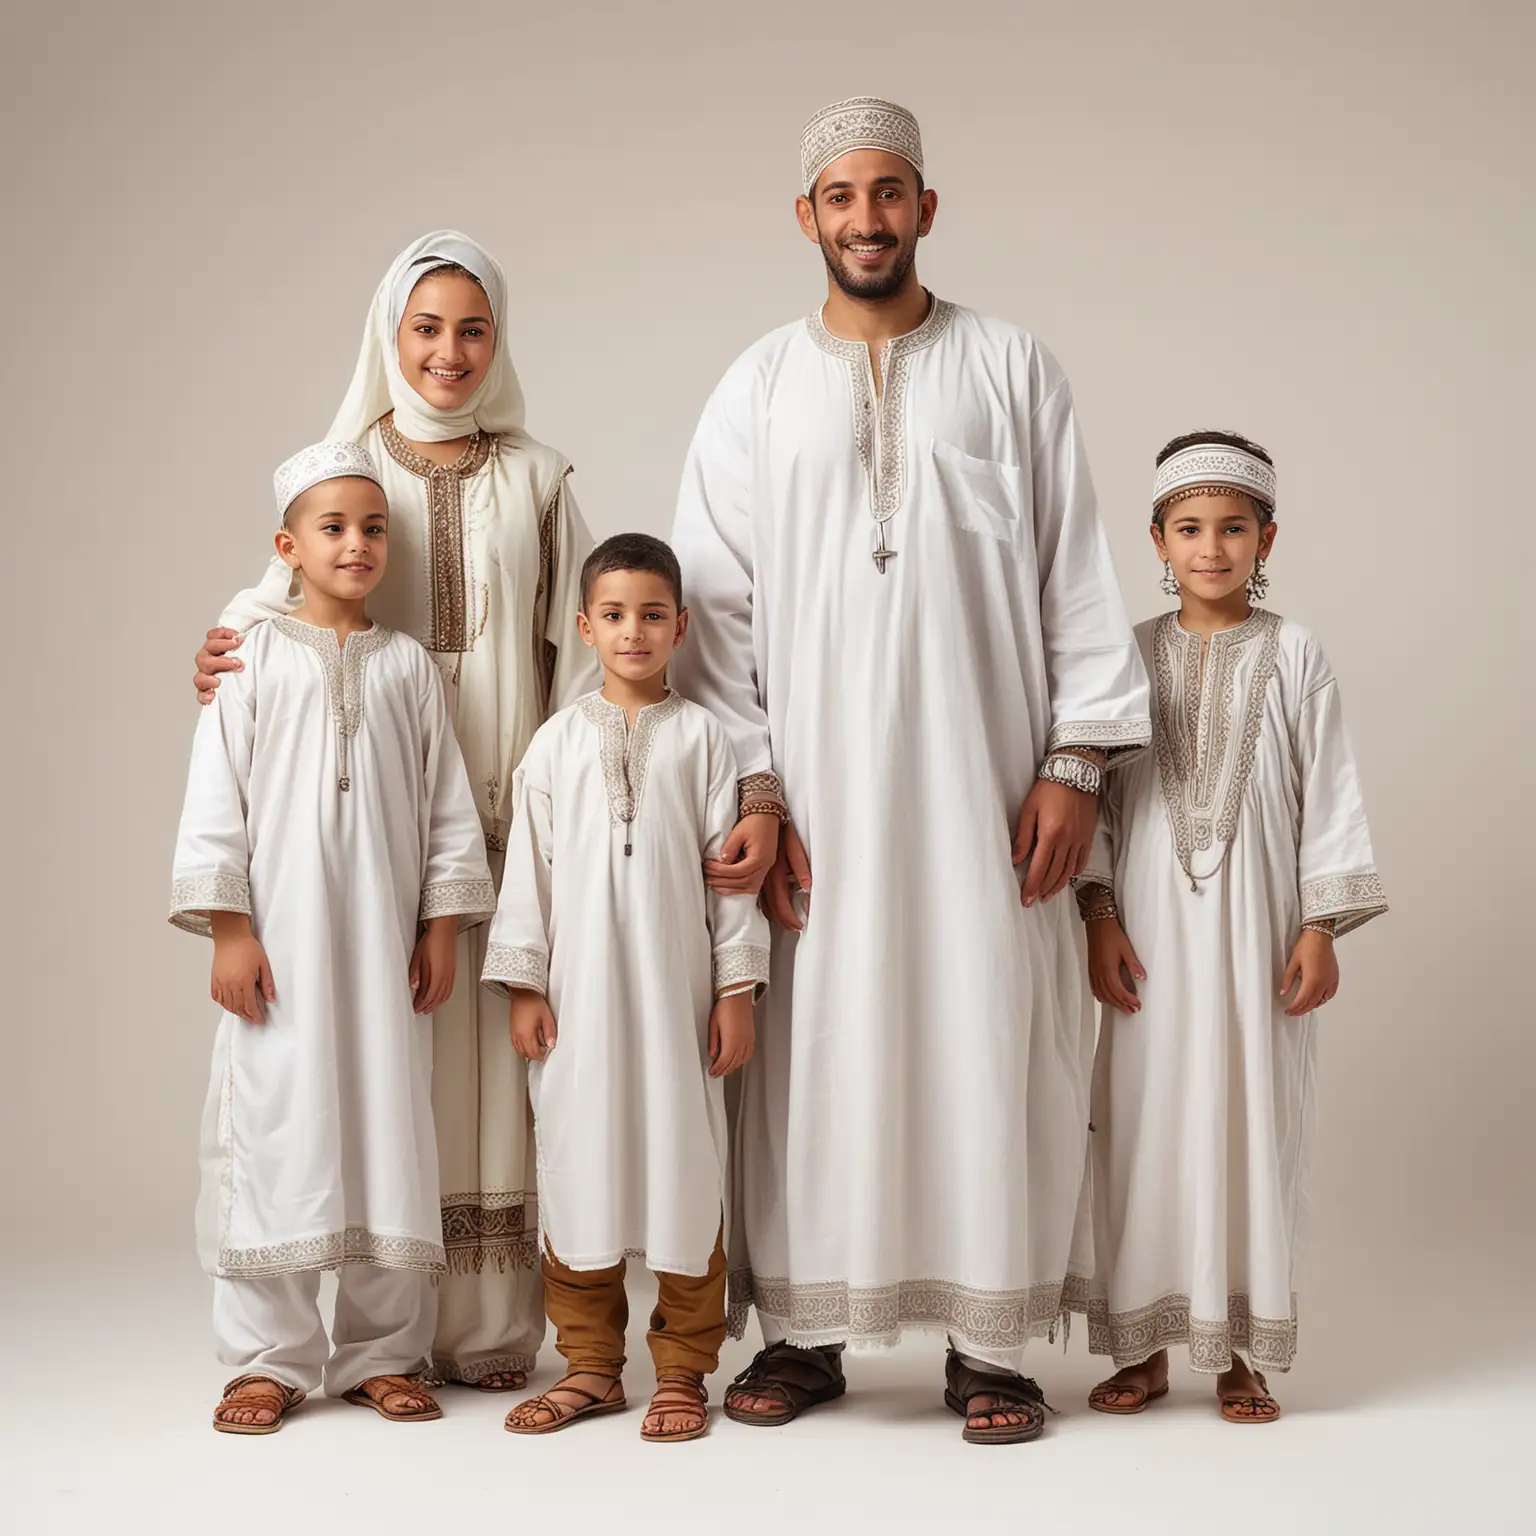 Moroccan Family in Traditional Clothing Standing Together Against Neutral Background